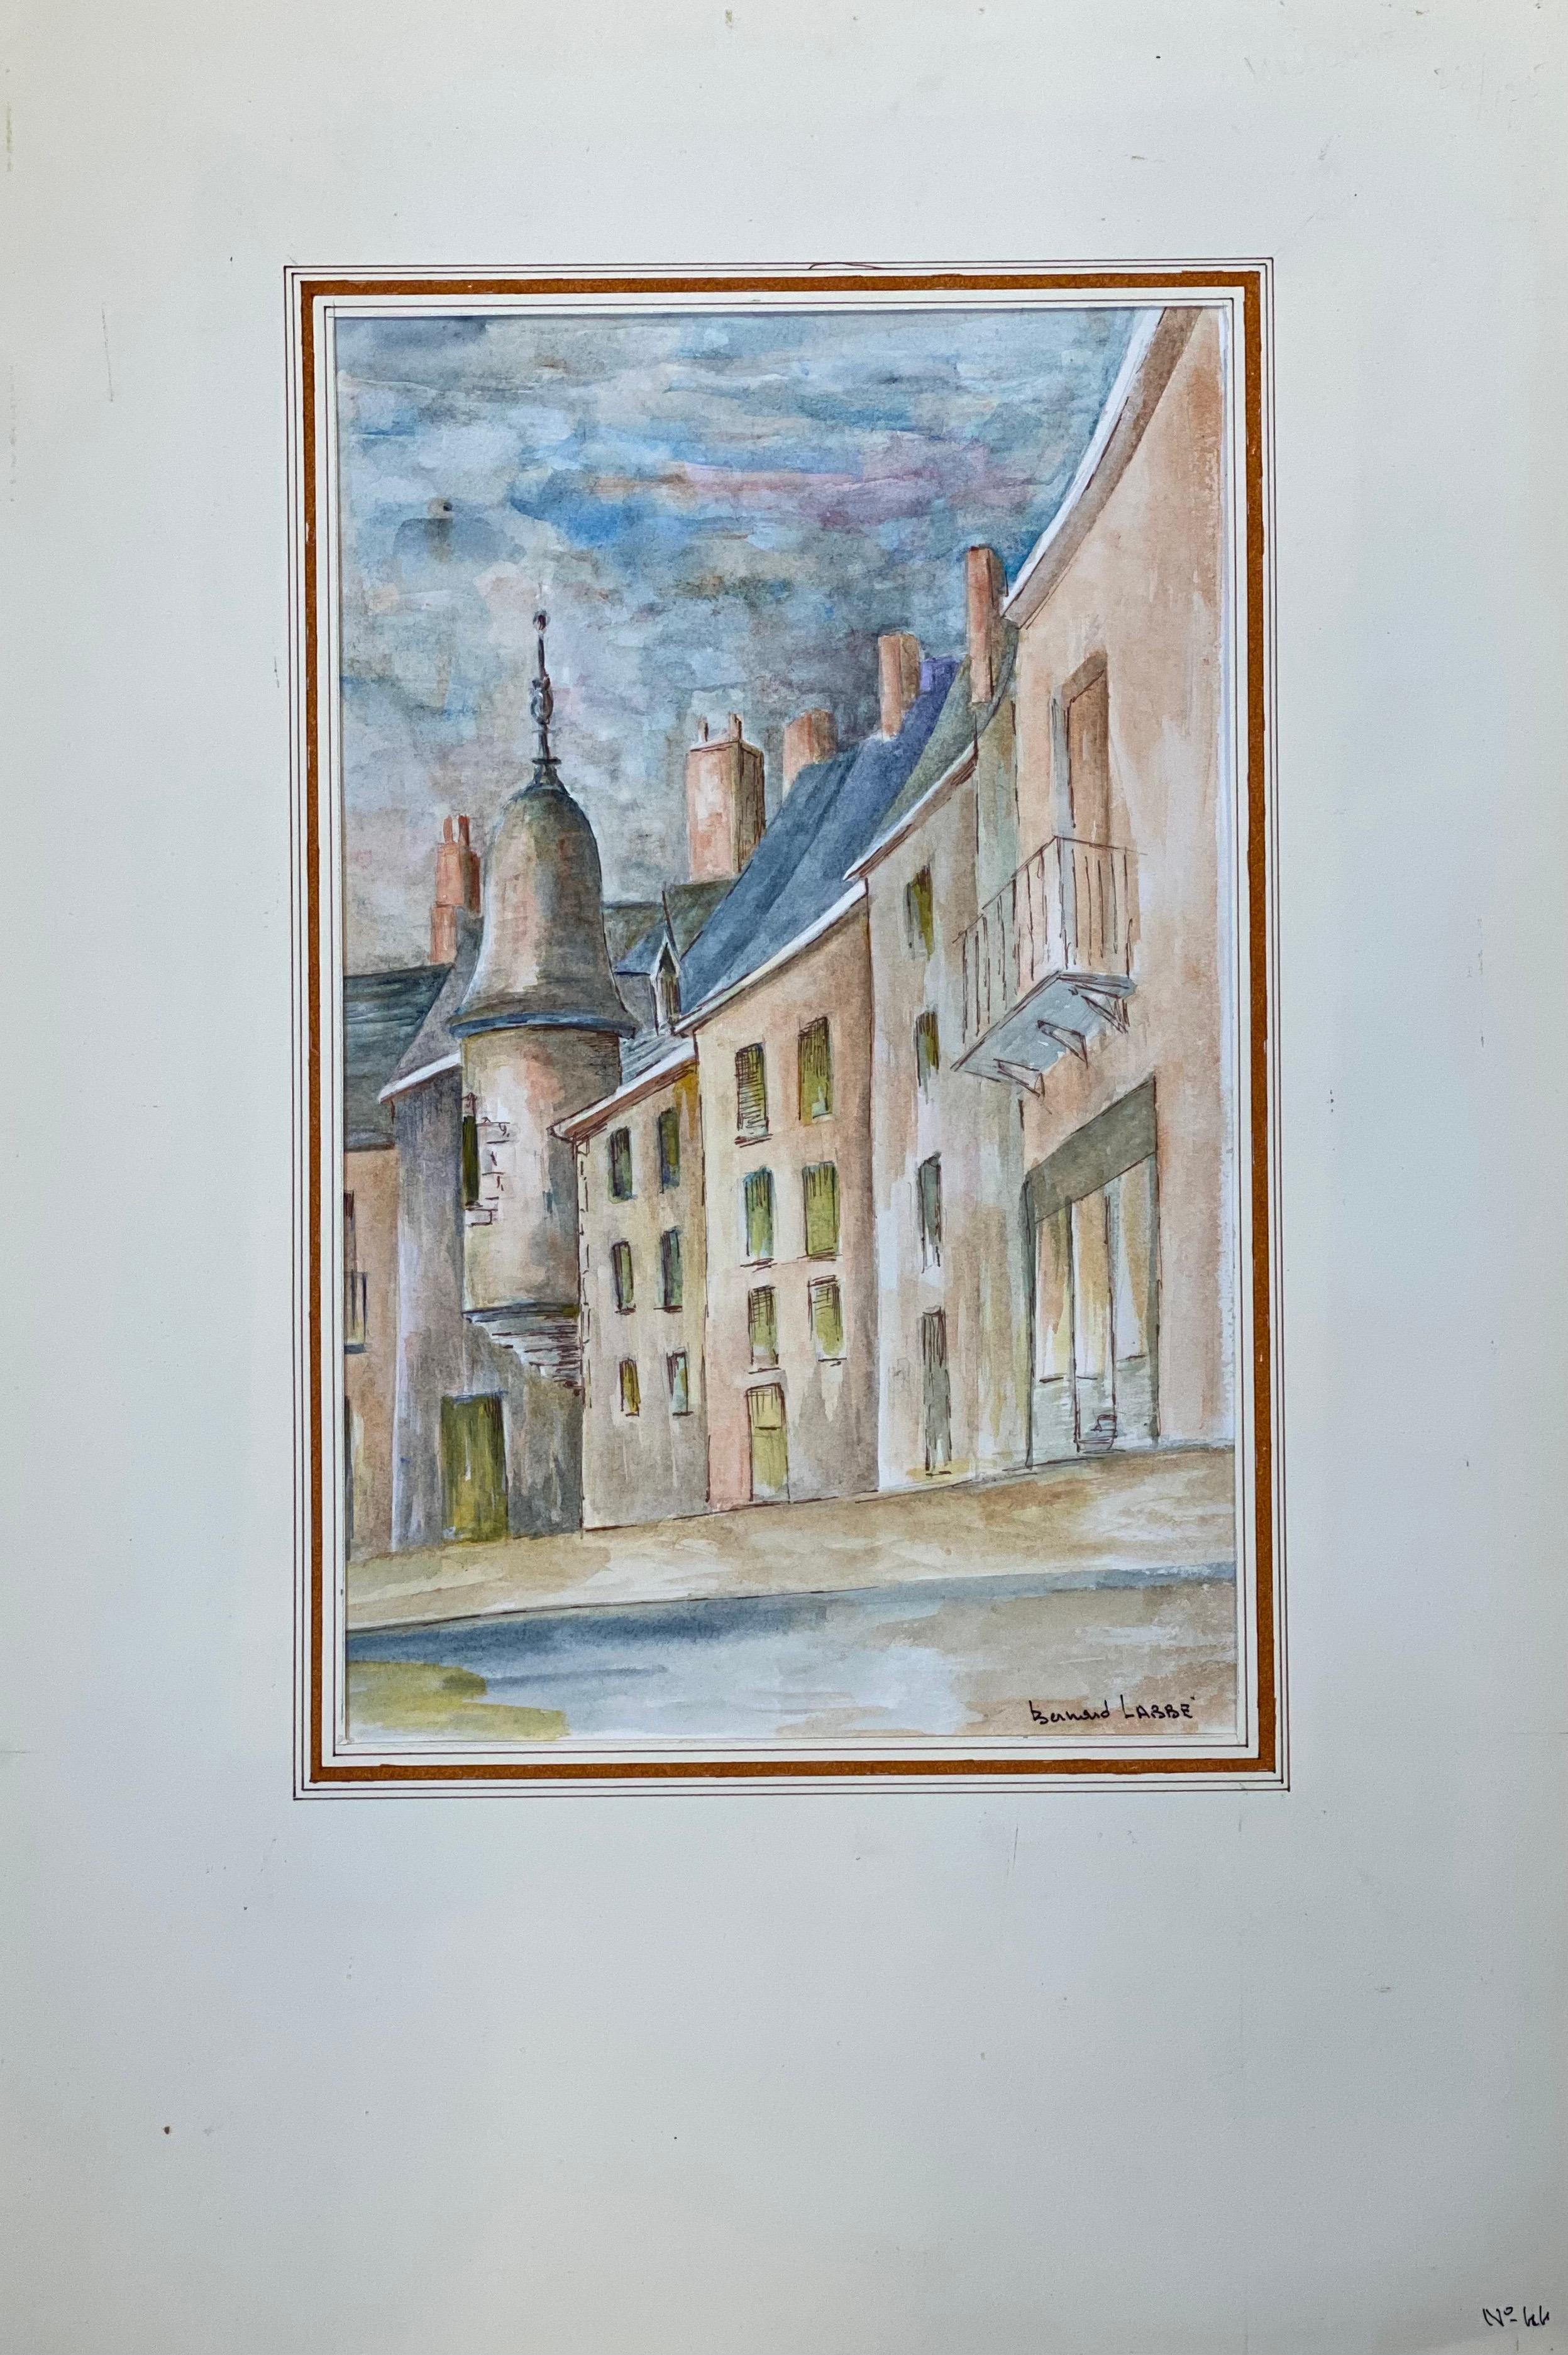 Bernard Labbe Landscape Painting - 1950's French Modernist/ Cubist Painting signed - Tall French Buildings